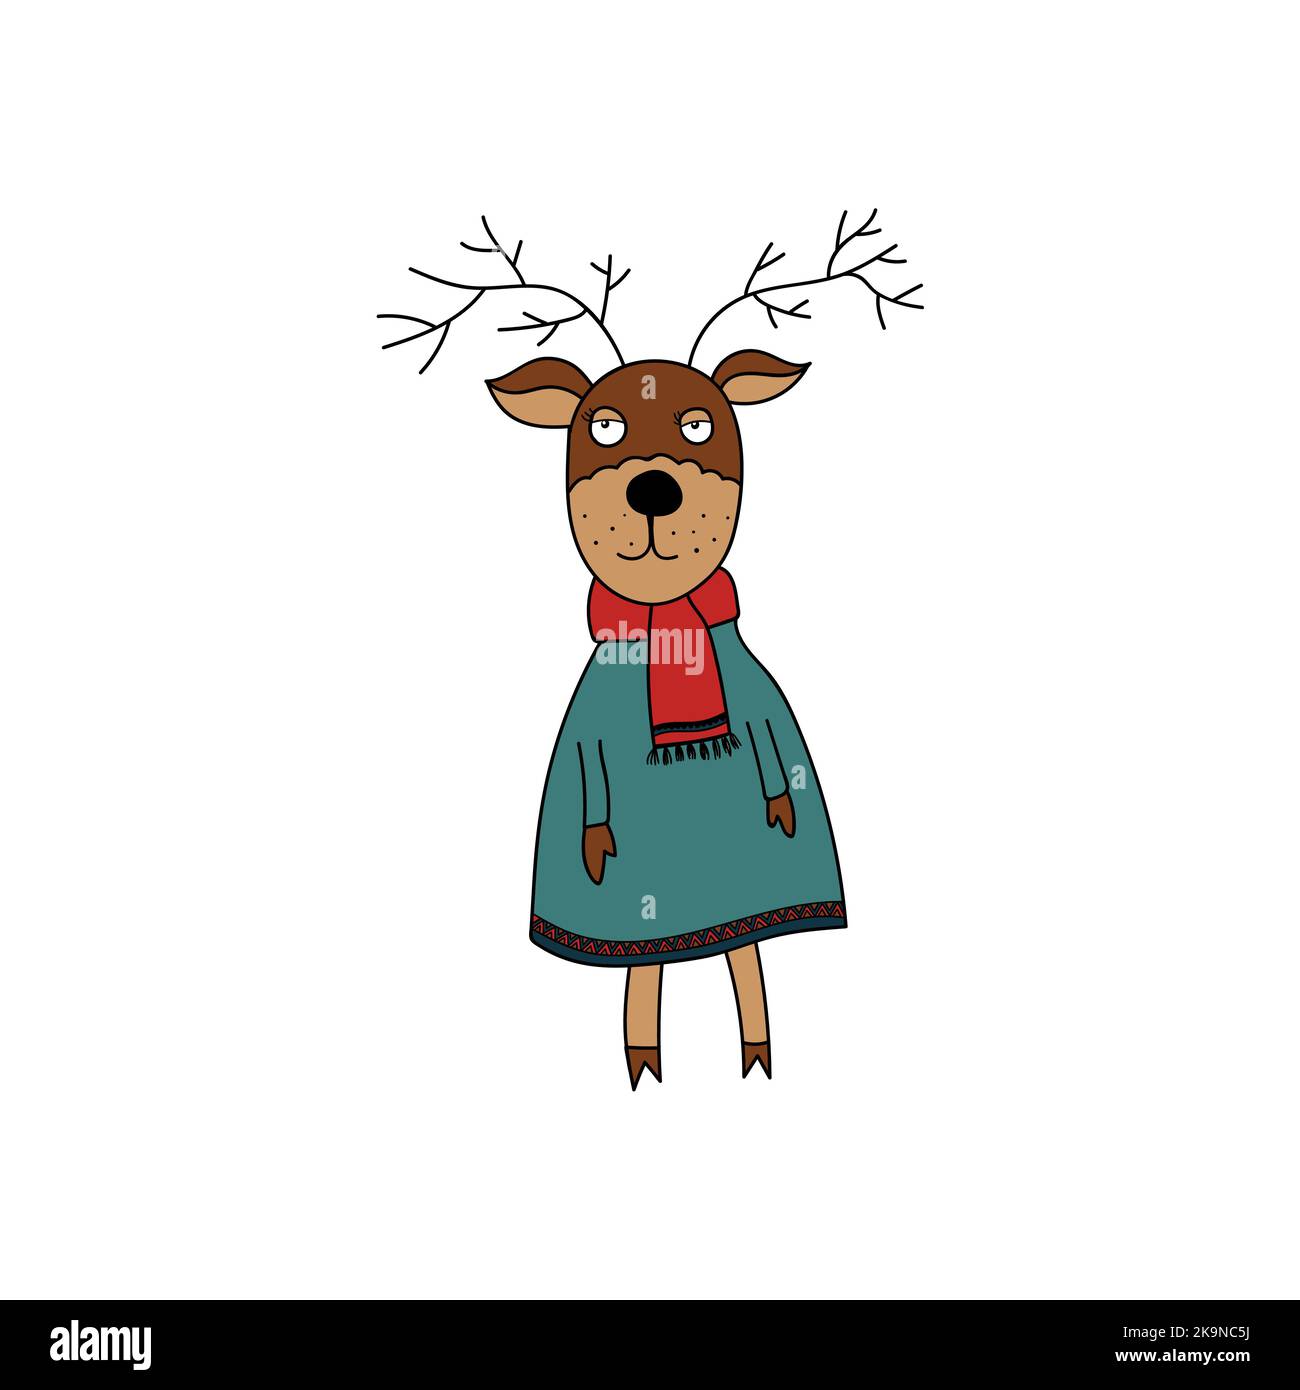 Funny animal. Cute deer dressed in coat, scarf and cap. Cartoon style. Vector illustration for coloring book, stickers, cards. Stock Vector